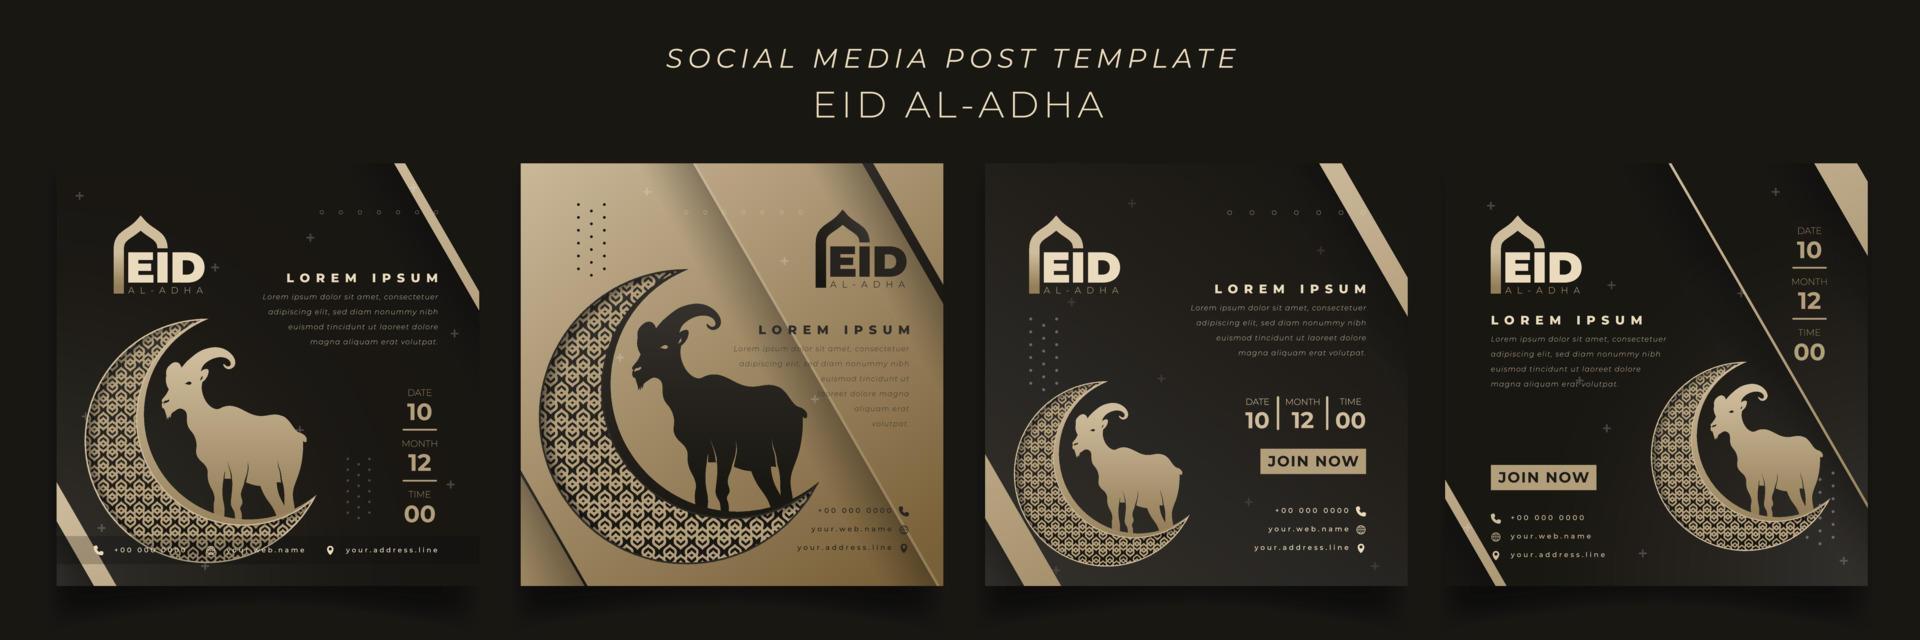 Social media post template for eid al adha in black gold background with goat and crescent moon design vector